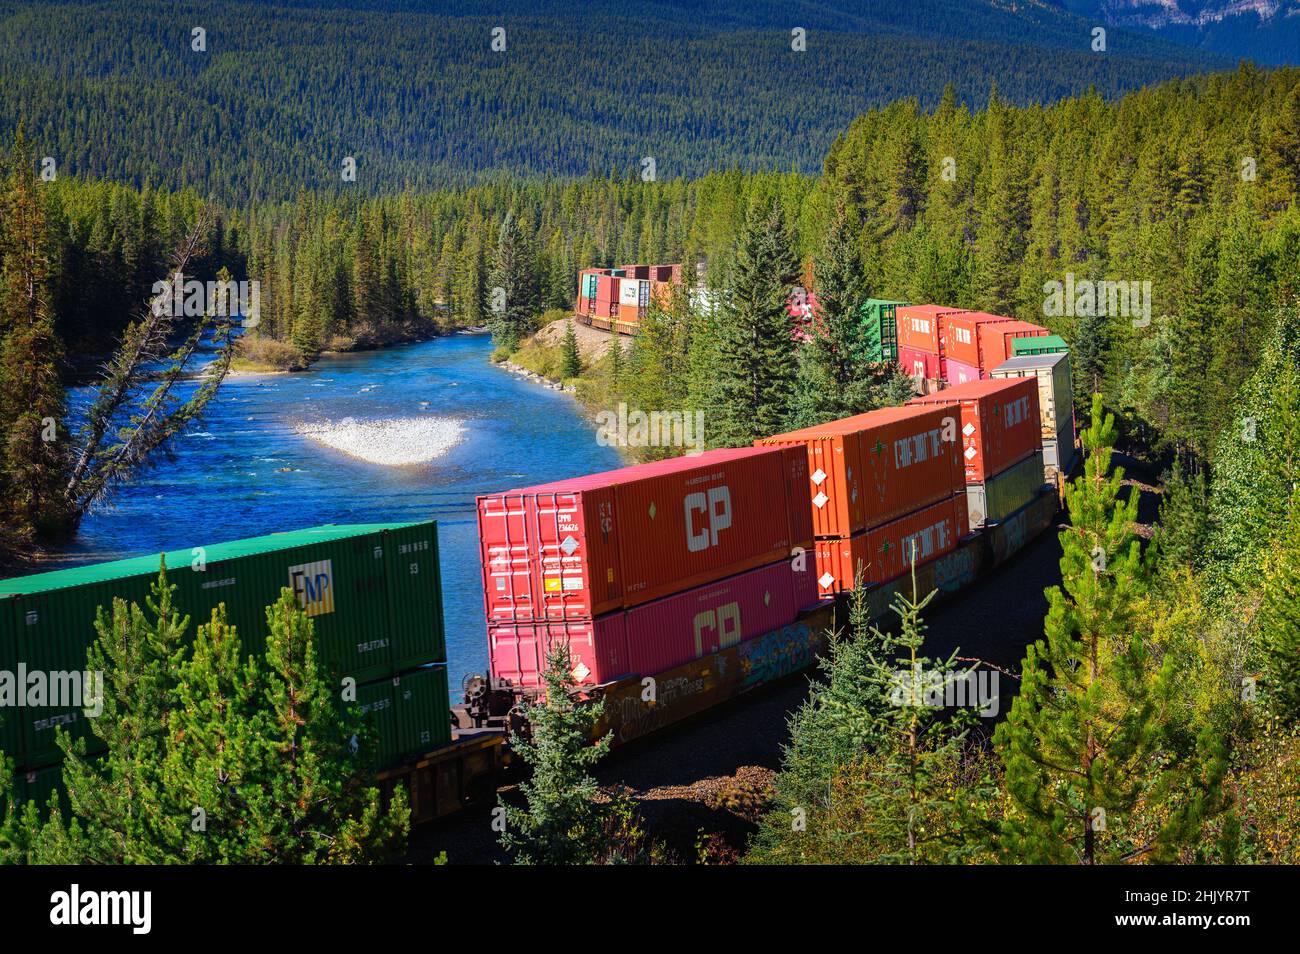 Freight train passing through Morant's Curve in bow valley, Canada Stock Photo